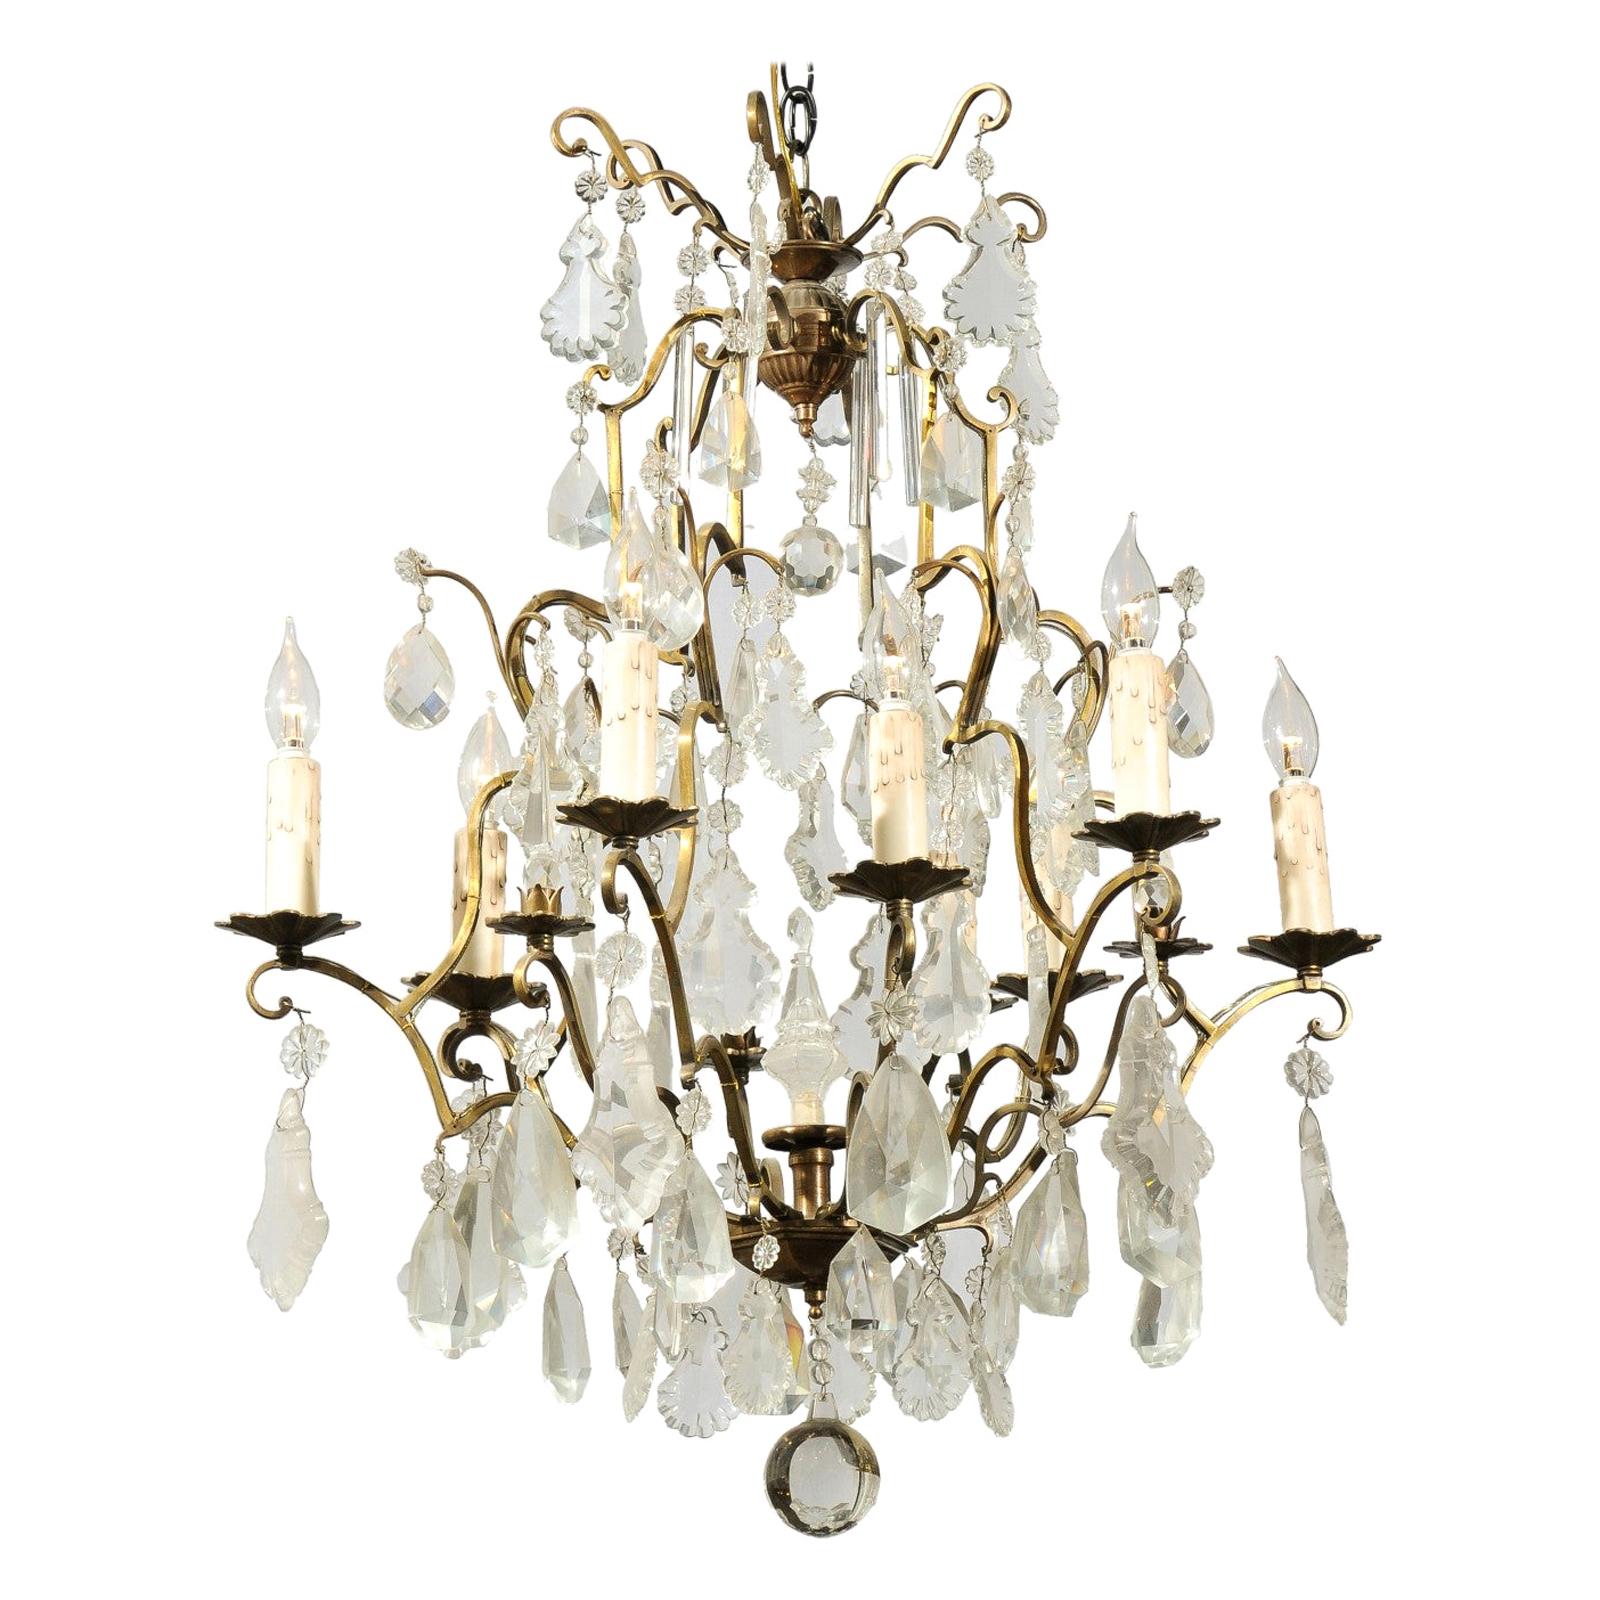 French Nine-Light Crystal Chandelier with Brass Armature and Finial, circa 1890